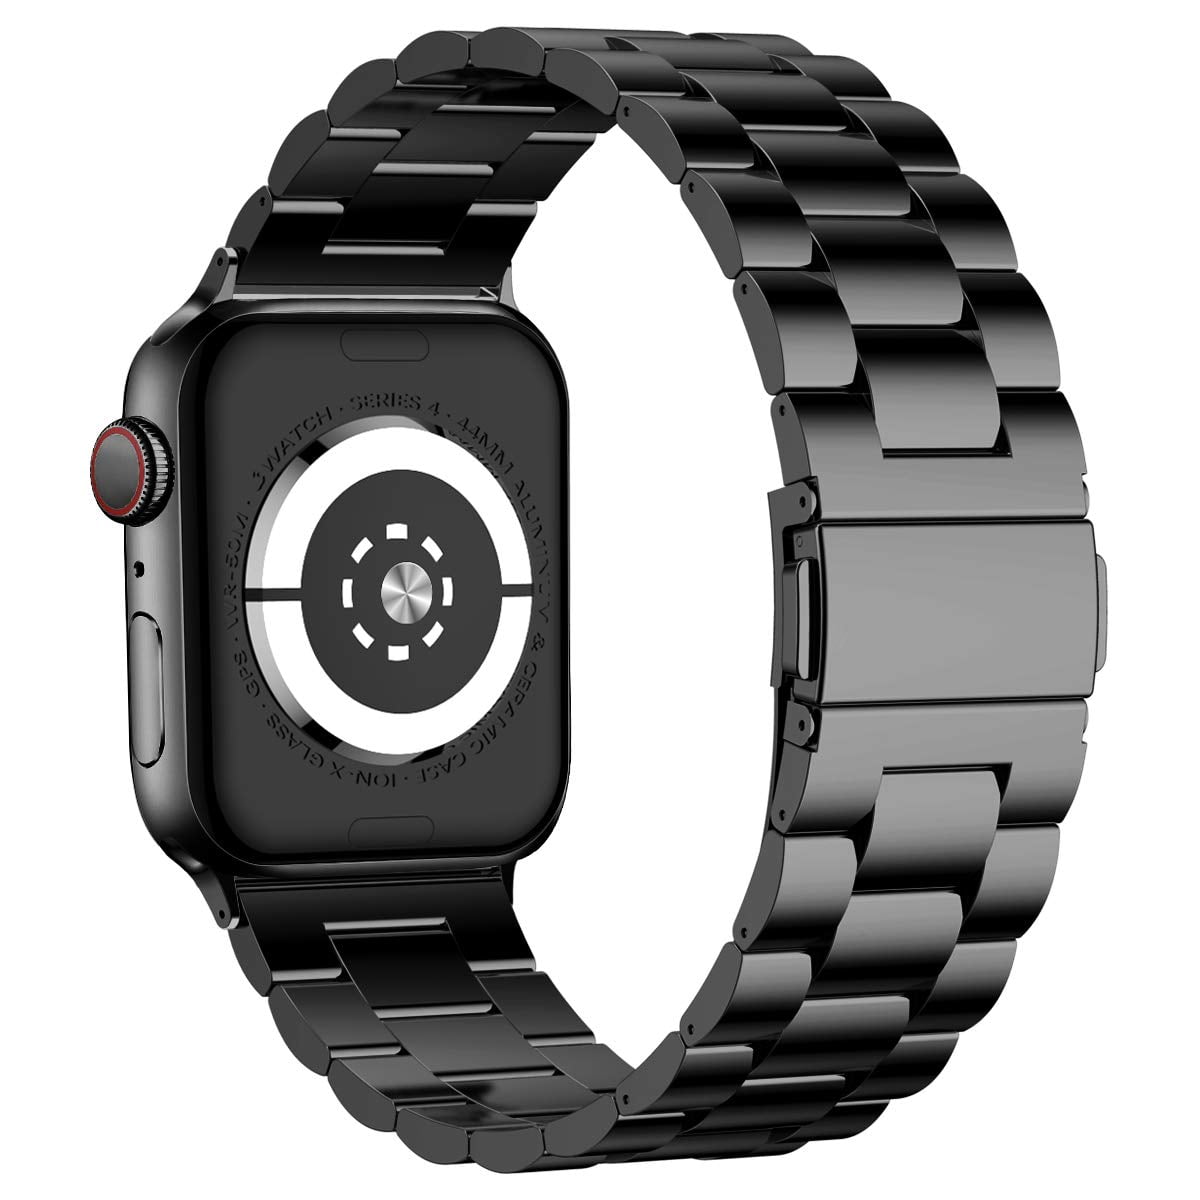 Supoix 42mm/44mm XL Large Bands Compatible with Apple Watch Series 